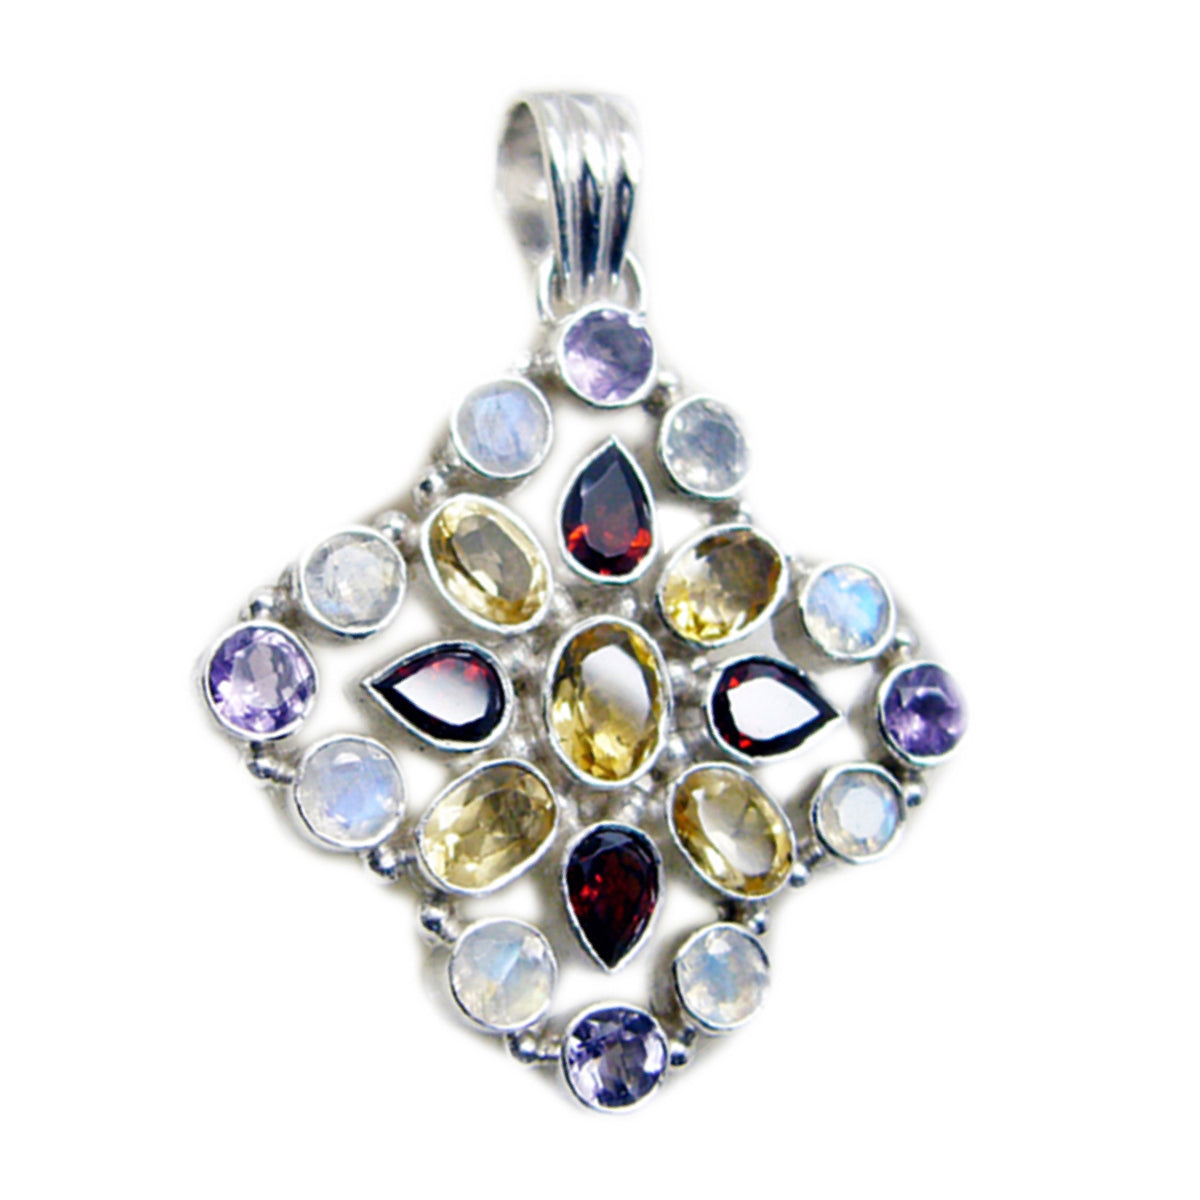 Riyo Beaut Gems Multi Faceted Multi Color Multi Stone Silver Pendant Gift For Boxing Day